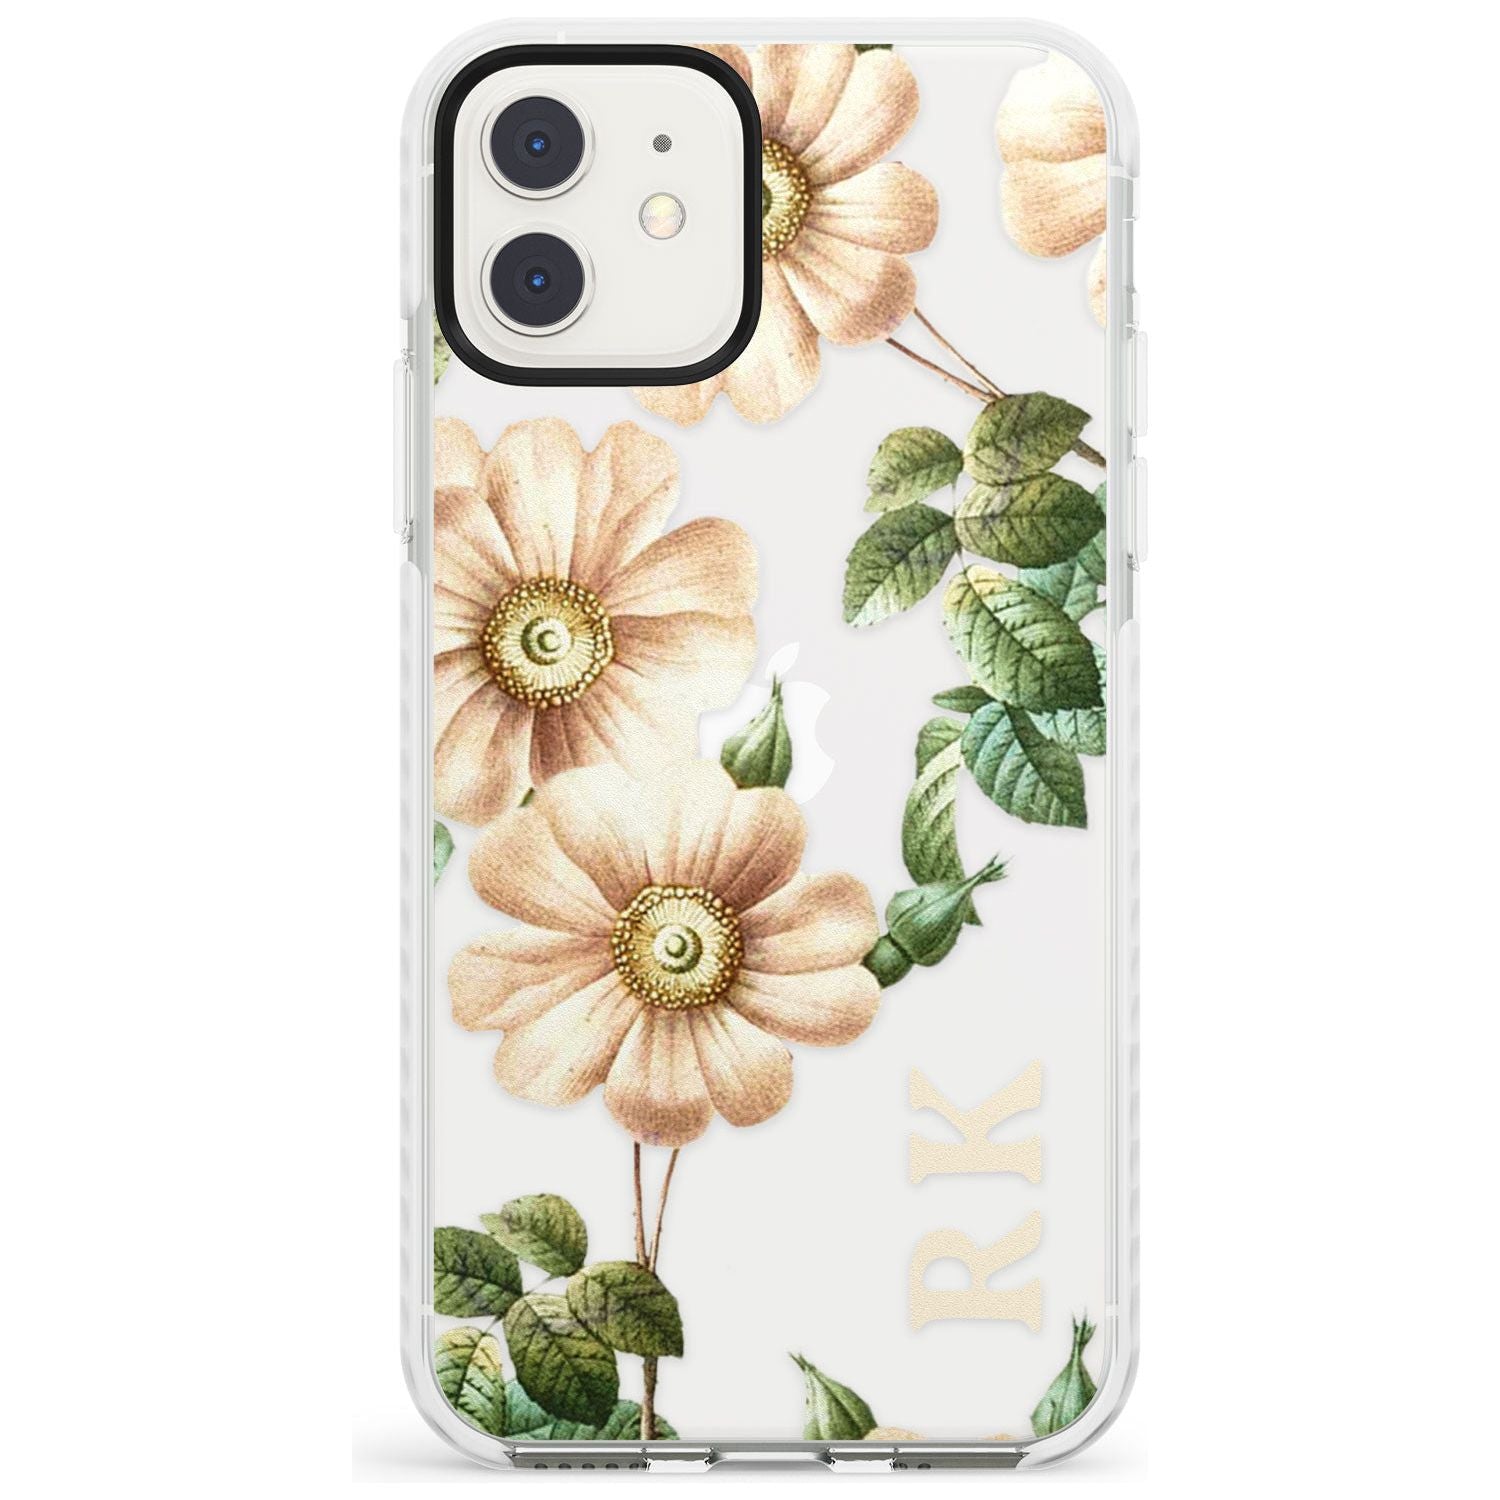 Custom Clear Vintage Floral Cream Anemones Impact Phone Case for iPhone 11